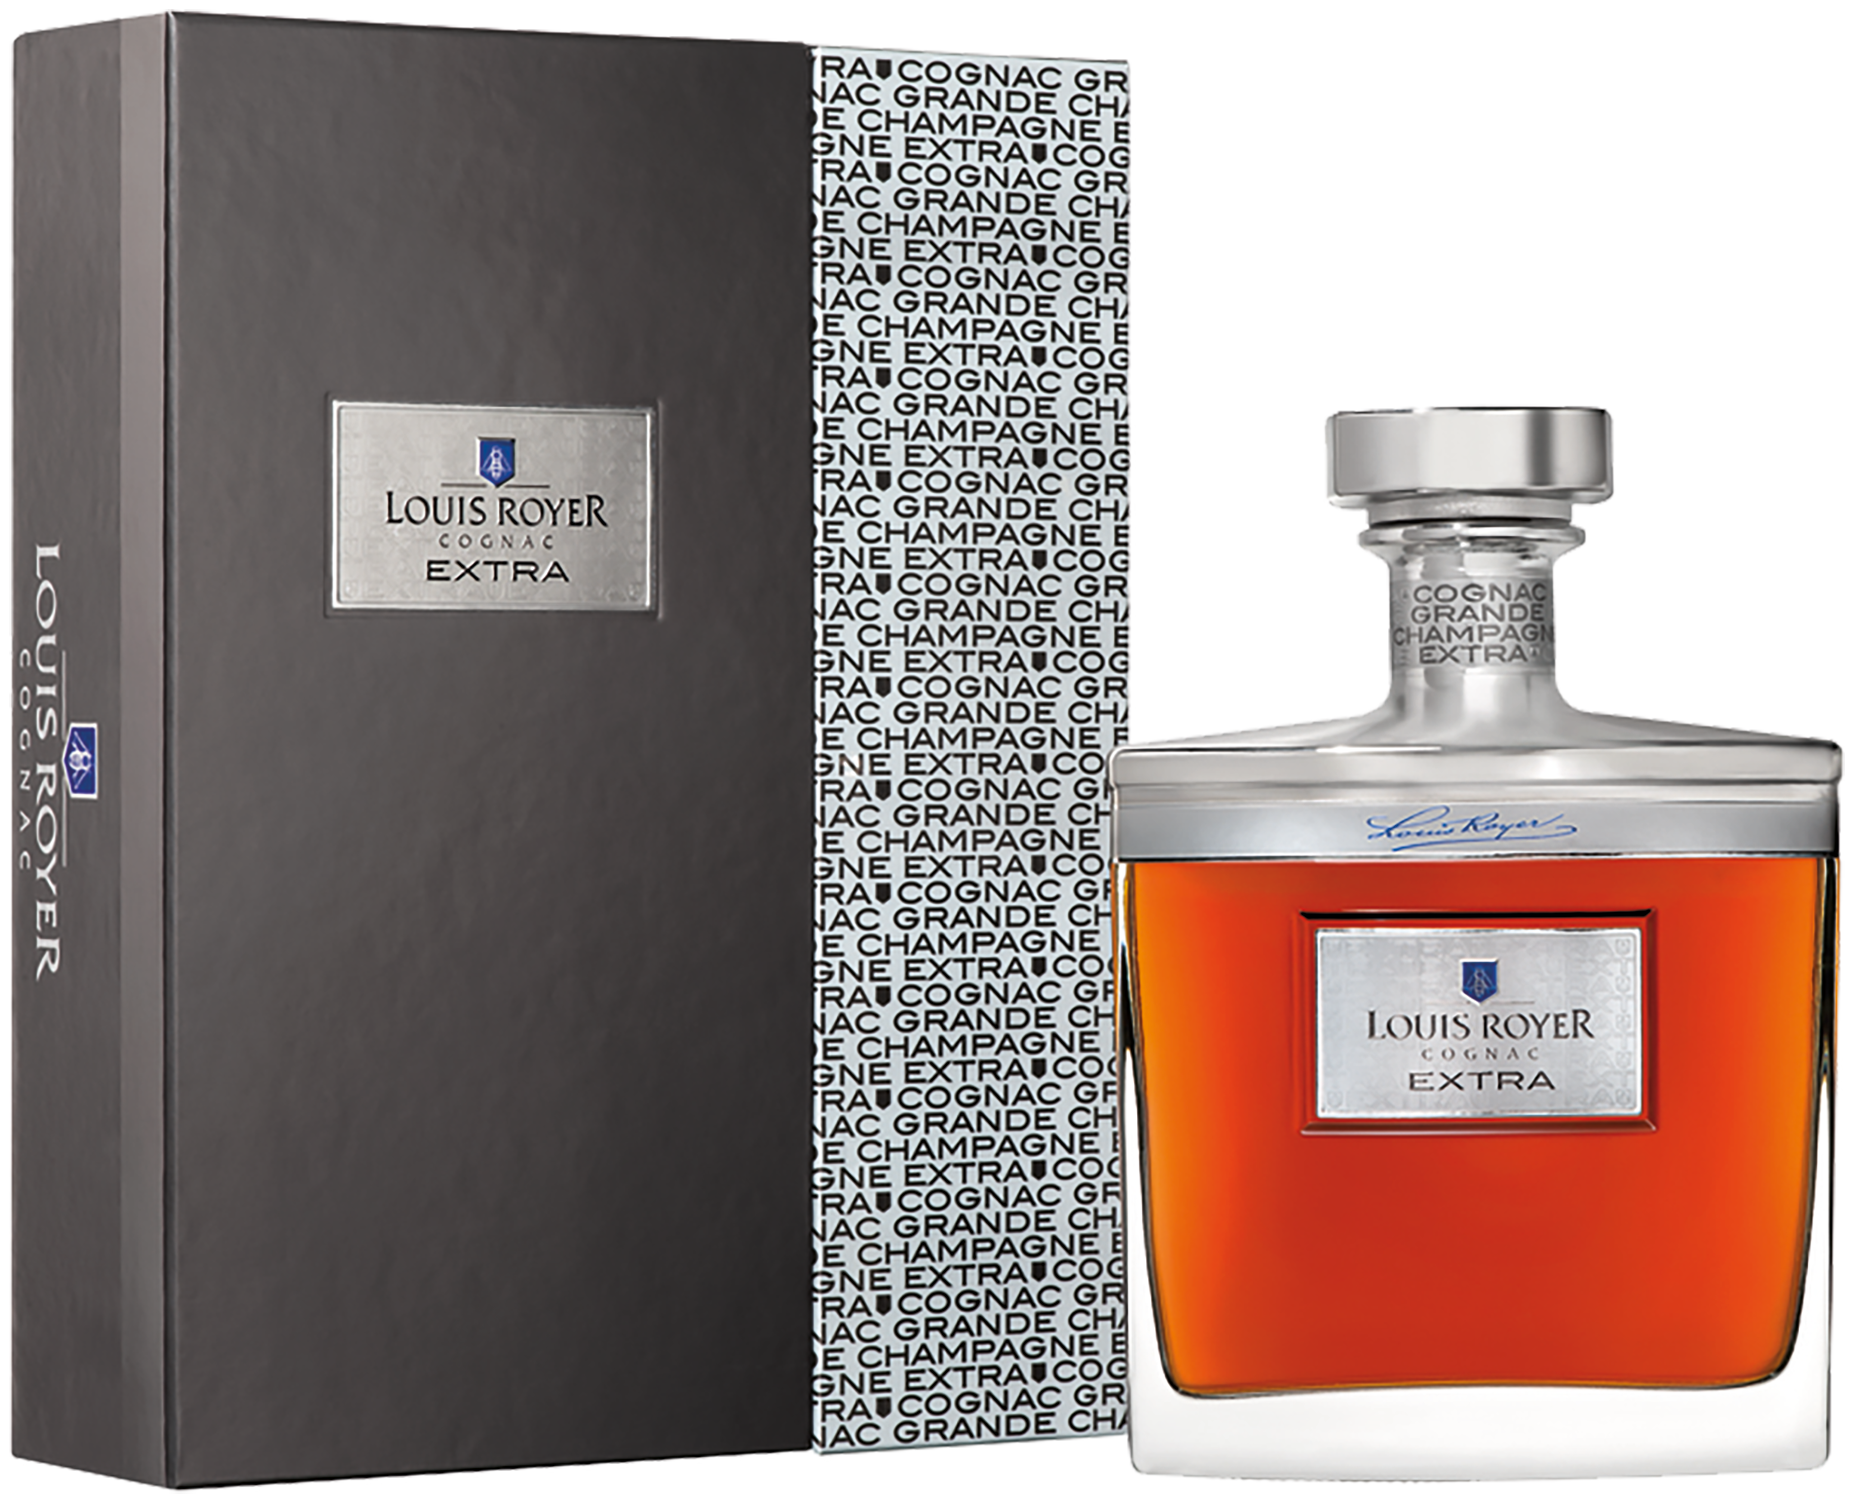 Louis Royer Cognac Grande Champagne Extra (gift box) park extra grande champagne cognac gift box